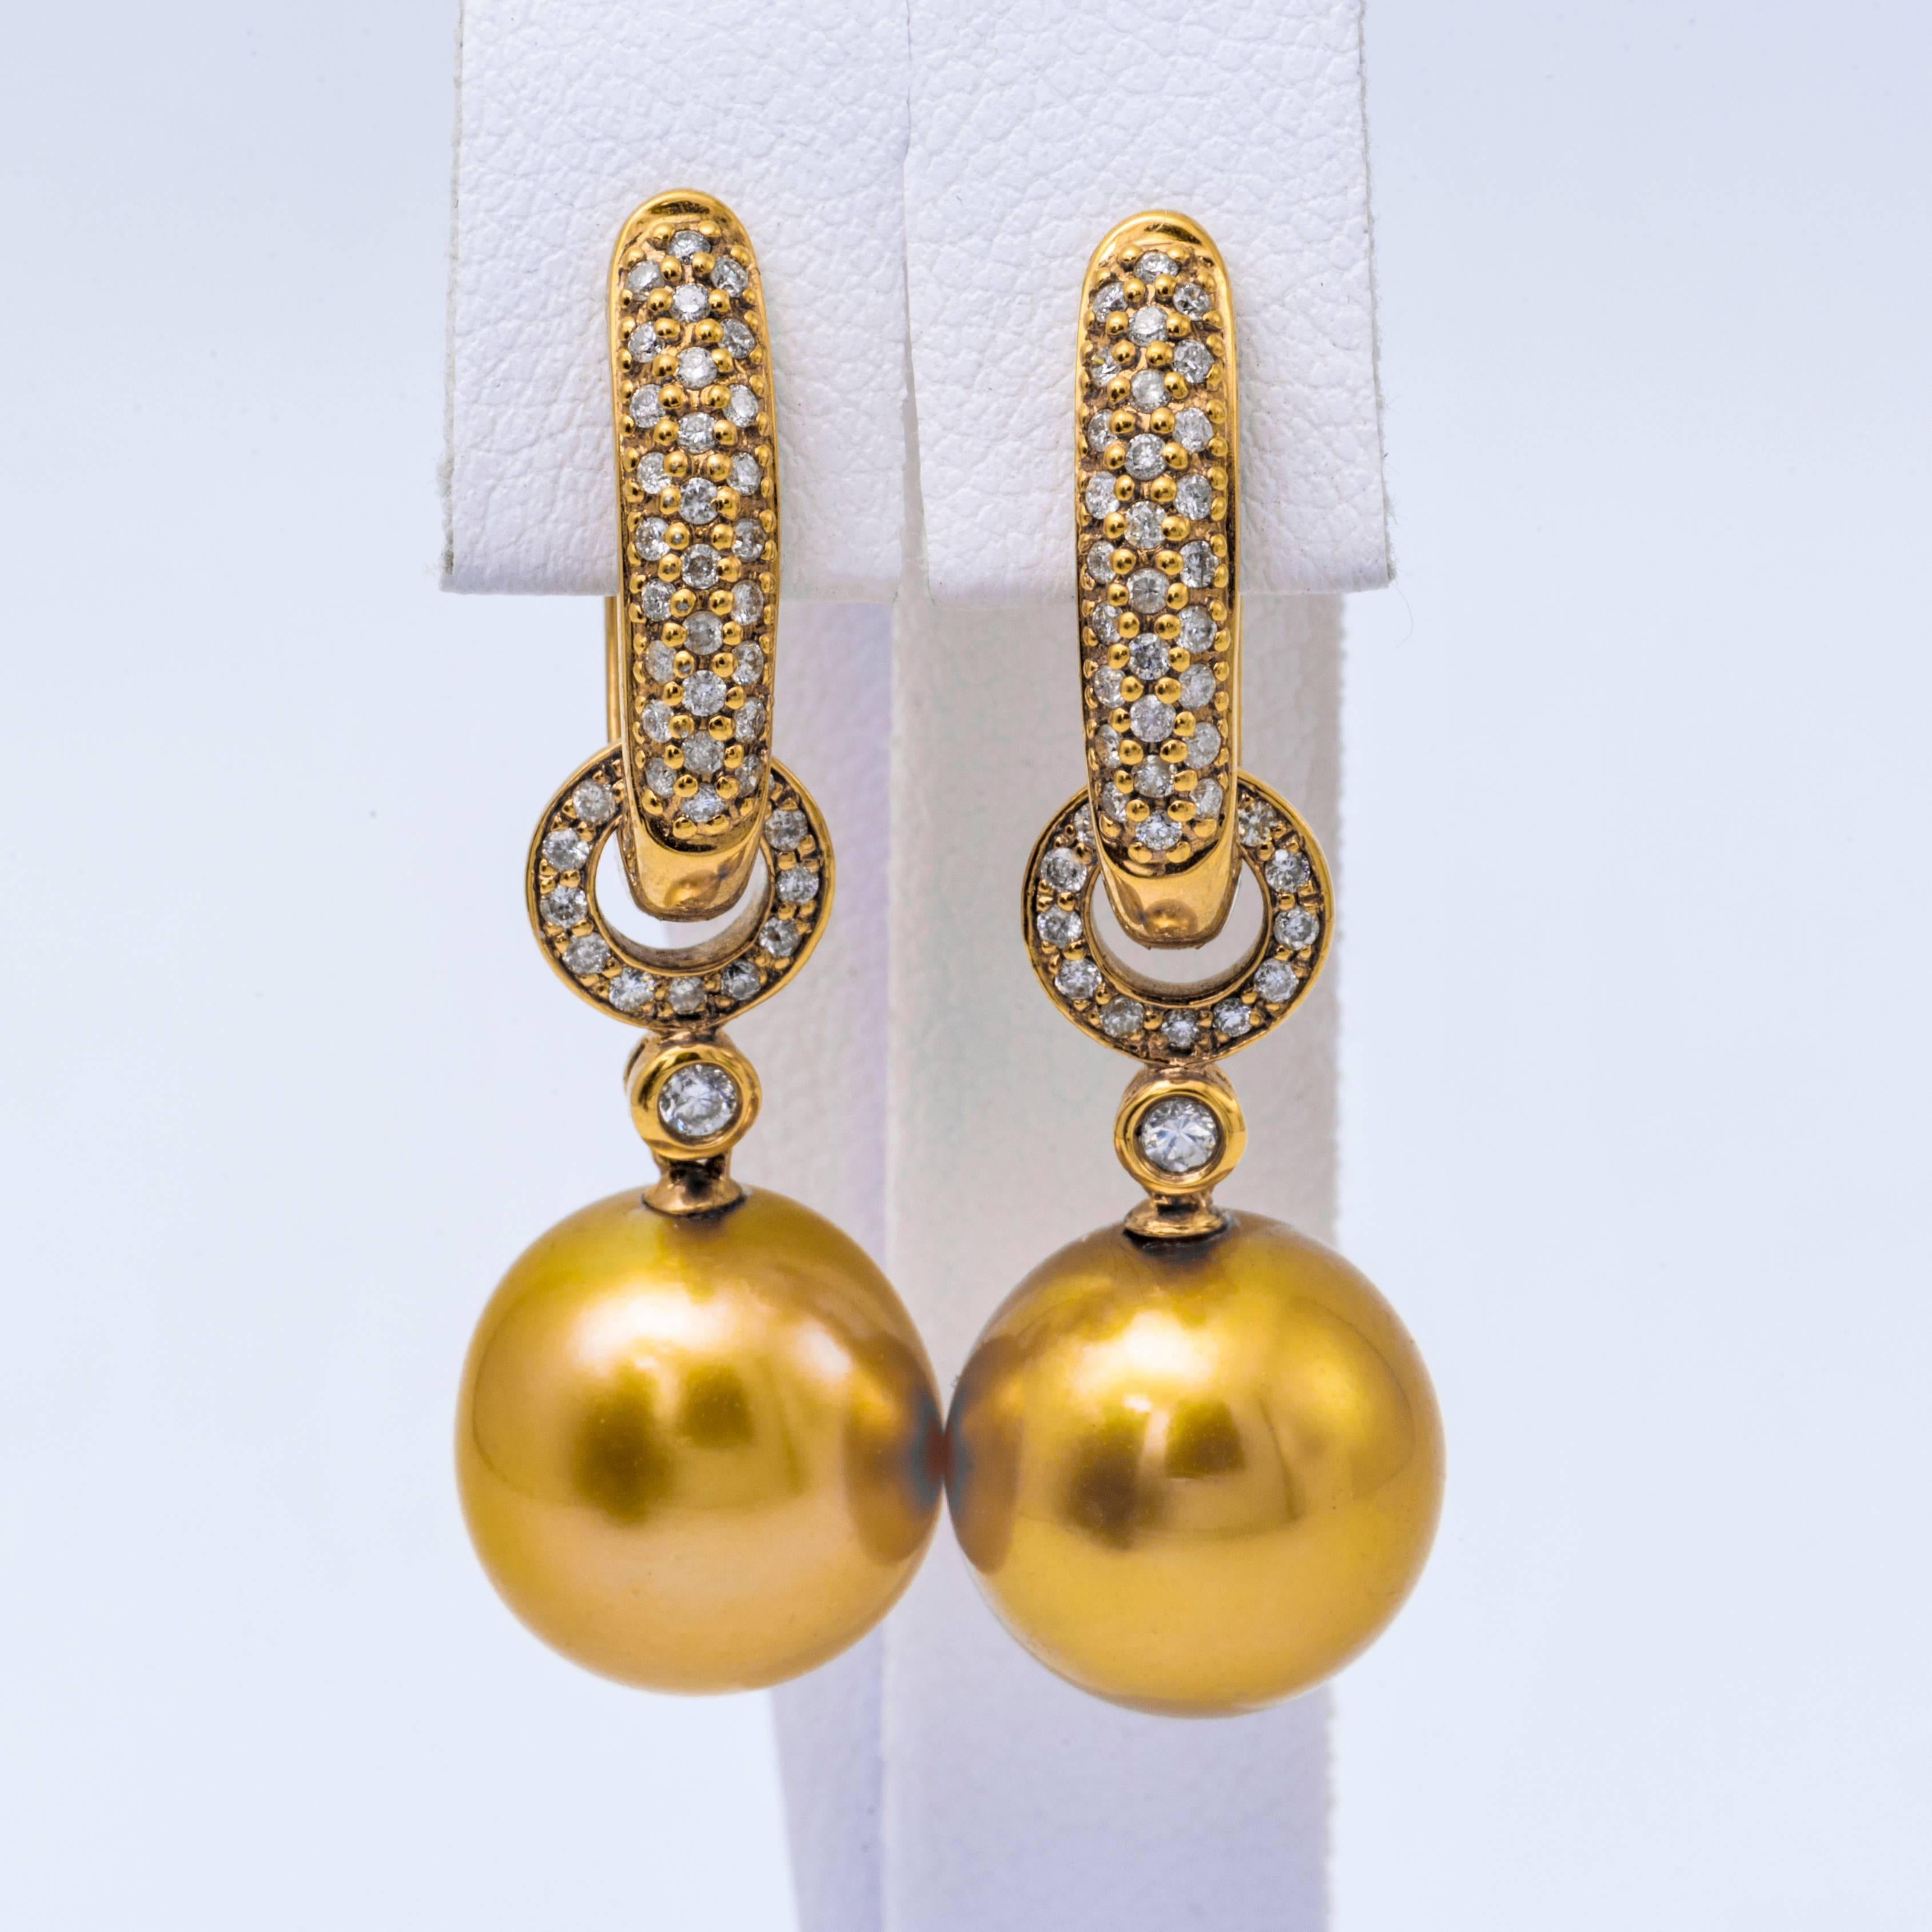 18K Yellow gold drop earrings featuring two Golden Pearl measuring 11-12mm flanked with round brilliants. 

Pearl Quality	AAA
Luster	AAA, Excellent
Nacre	Very Thick
